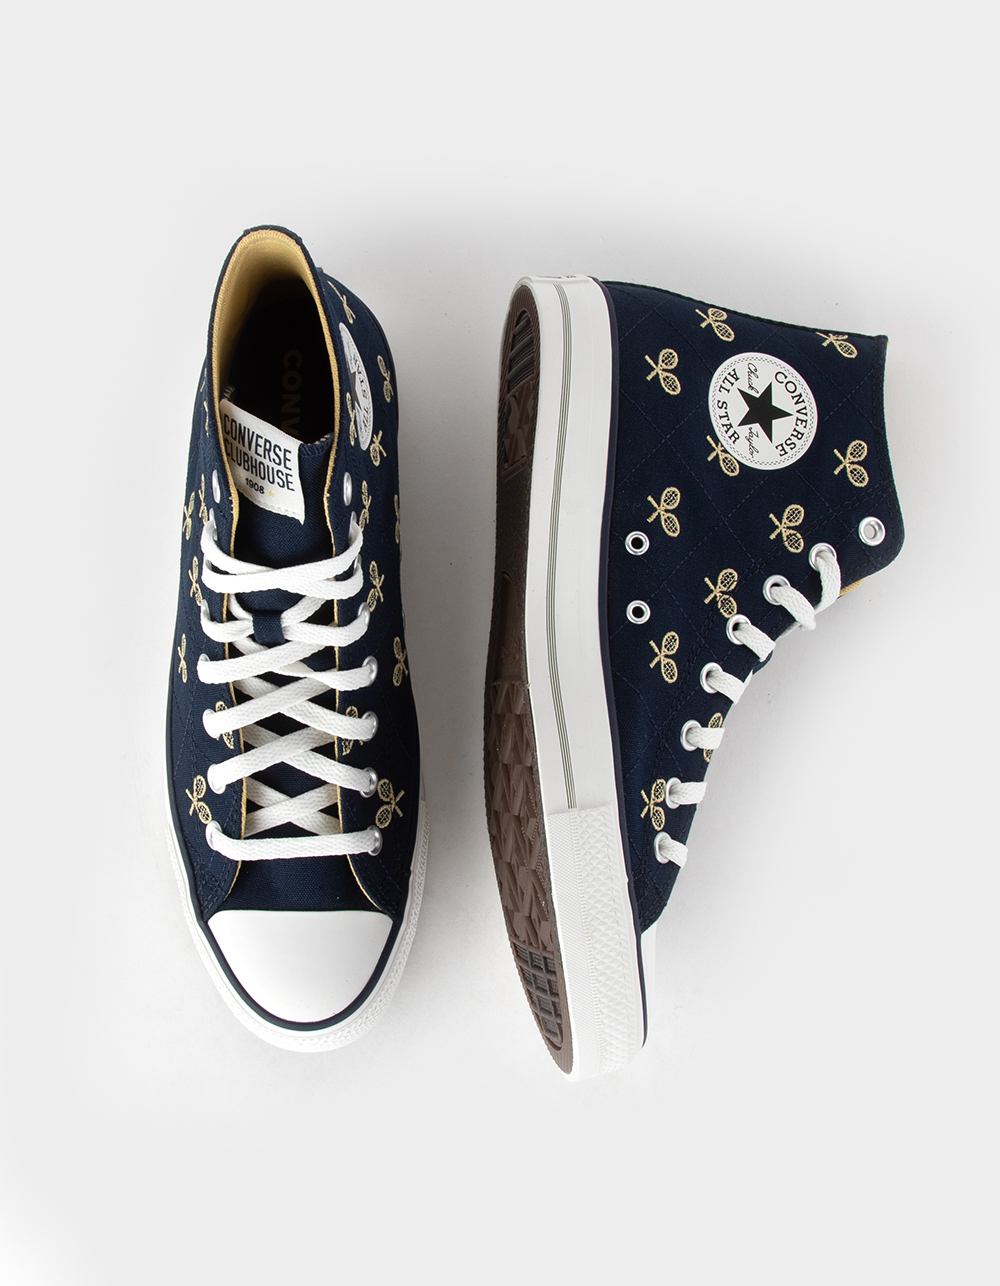 Converse Chuck Taylor All Star Clubhouse Limited Edition Shoes Navy